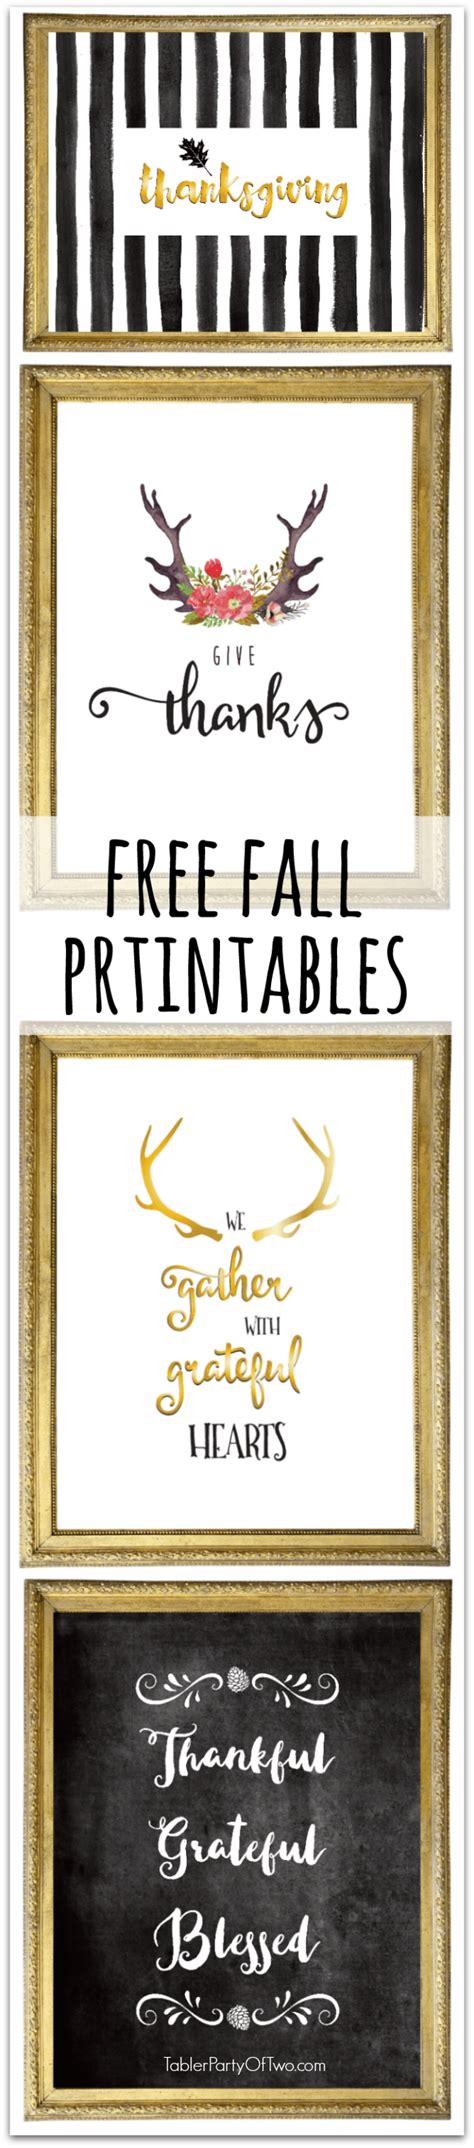 Add Some Fall Decor With These Free Thanksgiving Printables Free